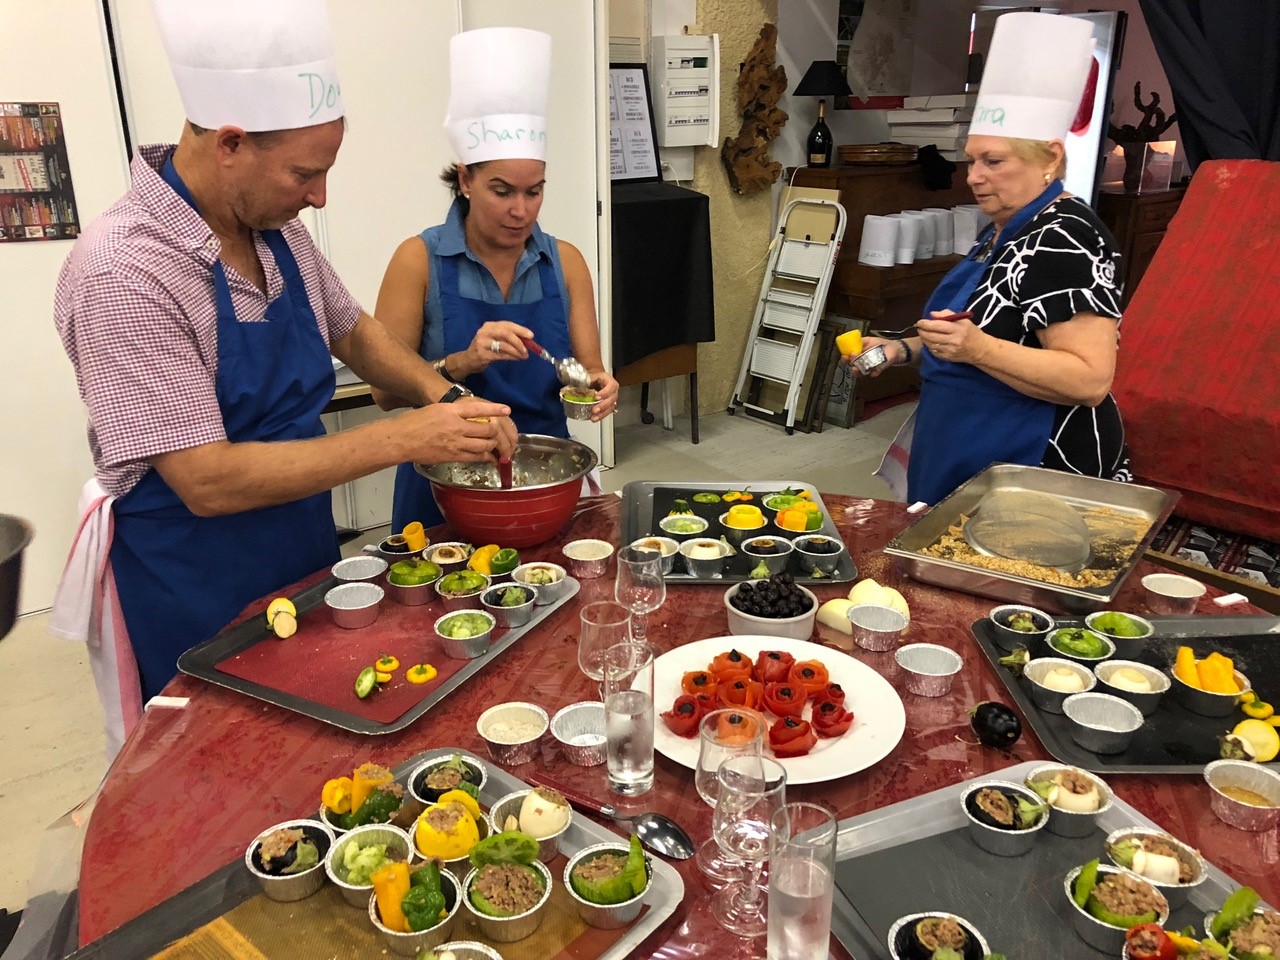 Guests learning how to prepare dishes